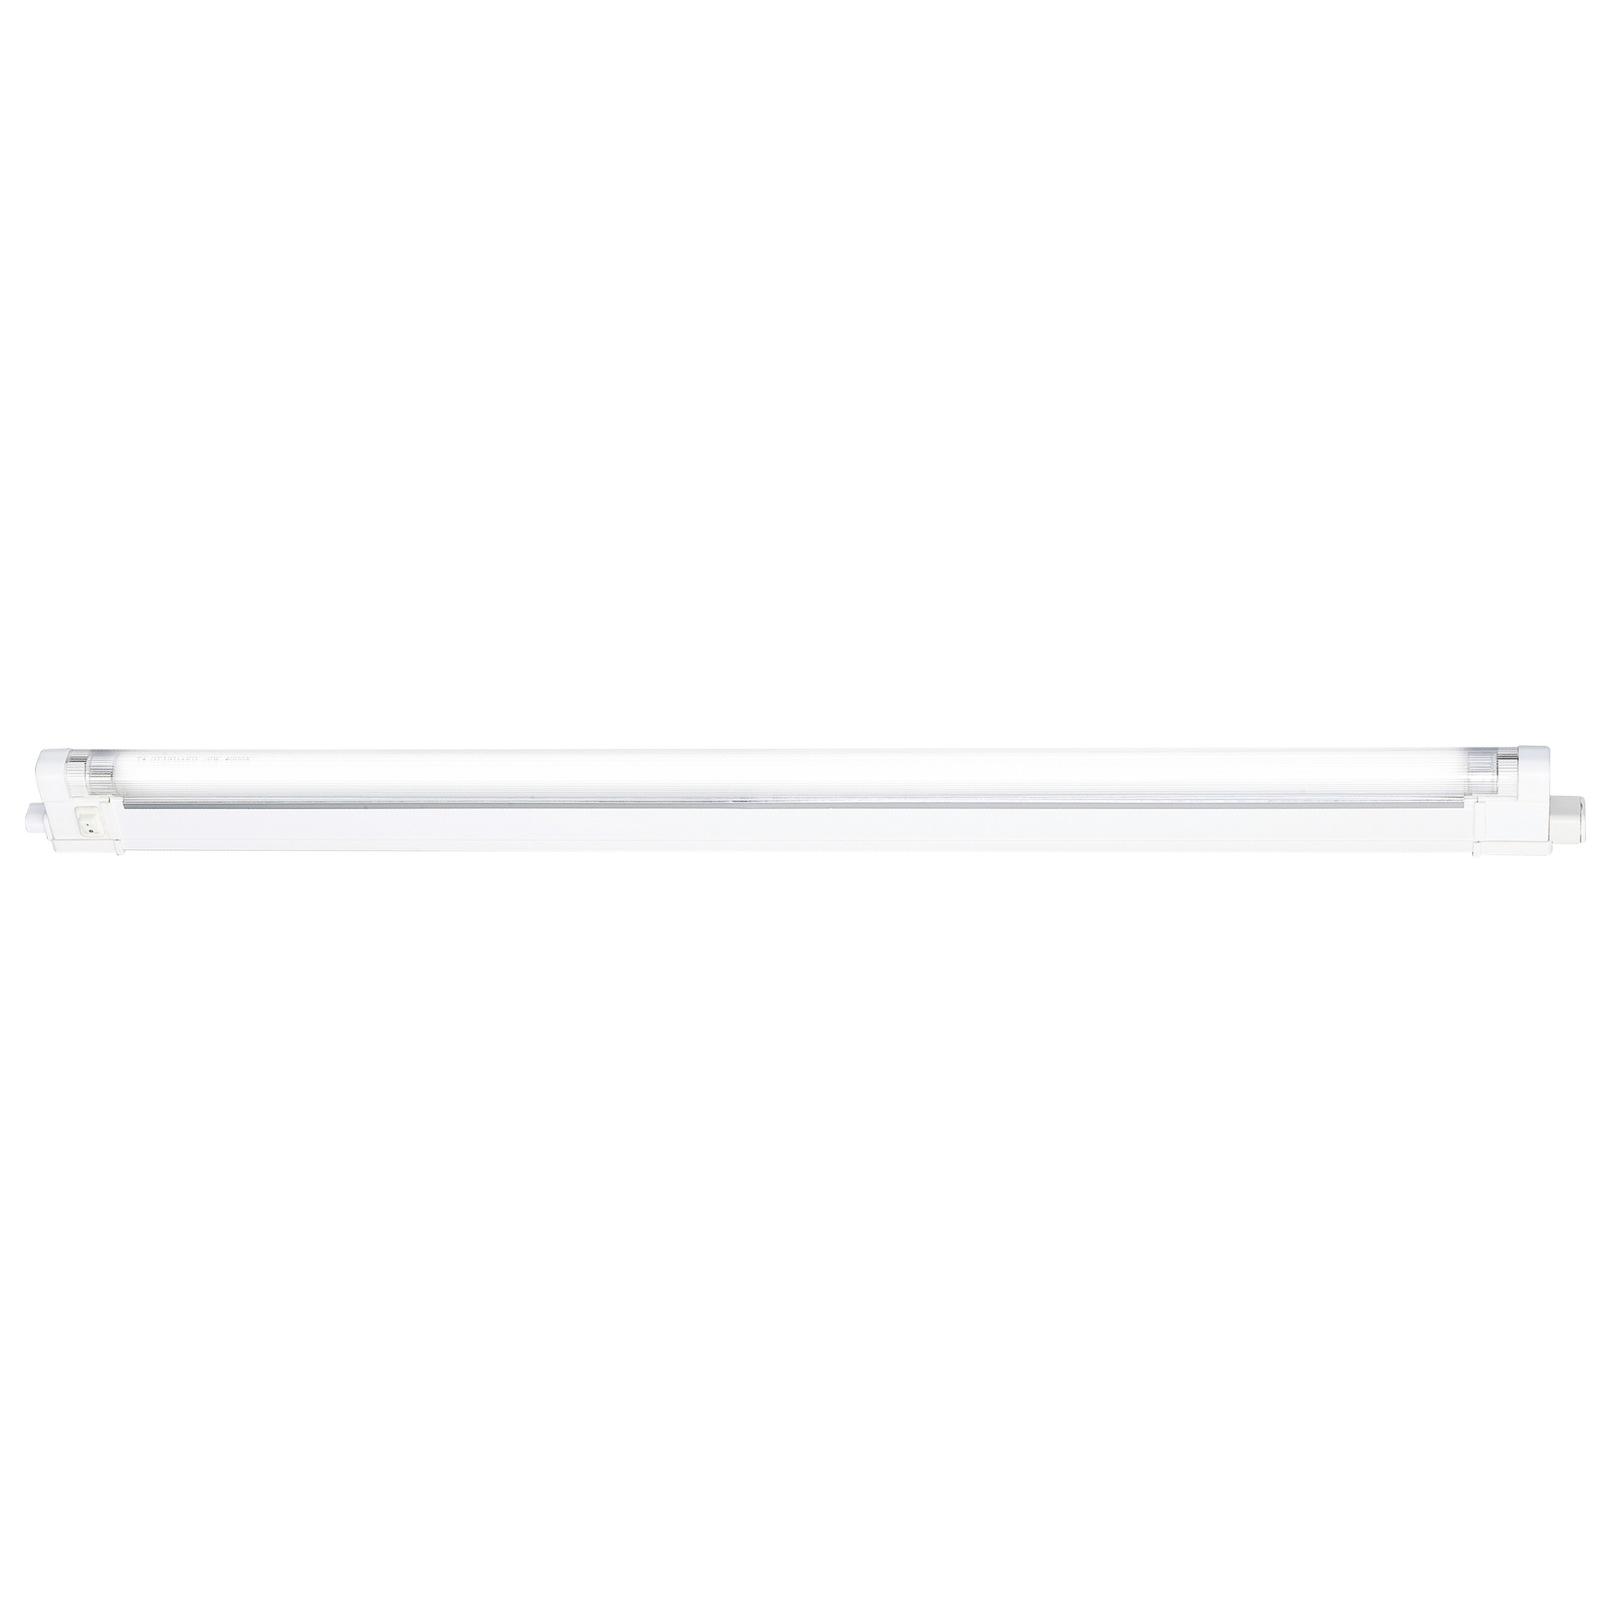 IP20 25W T4 Fluorescent Fitting With Tube, Switch And Diffuser 4000K - T425 